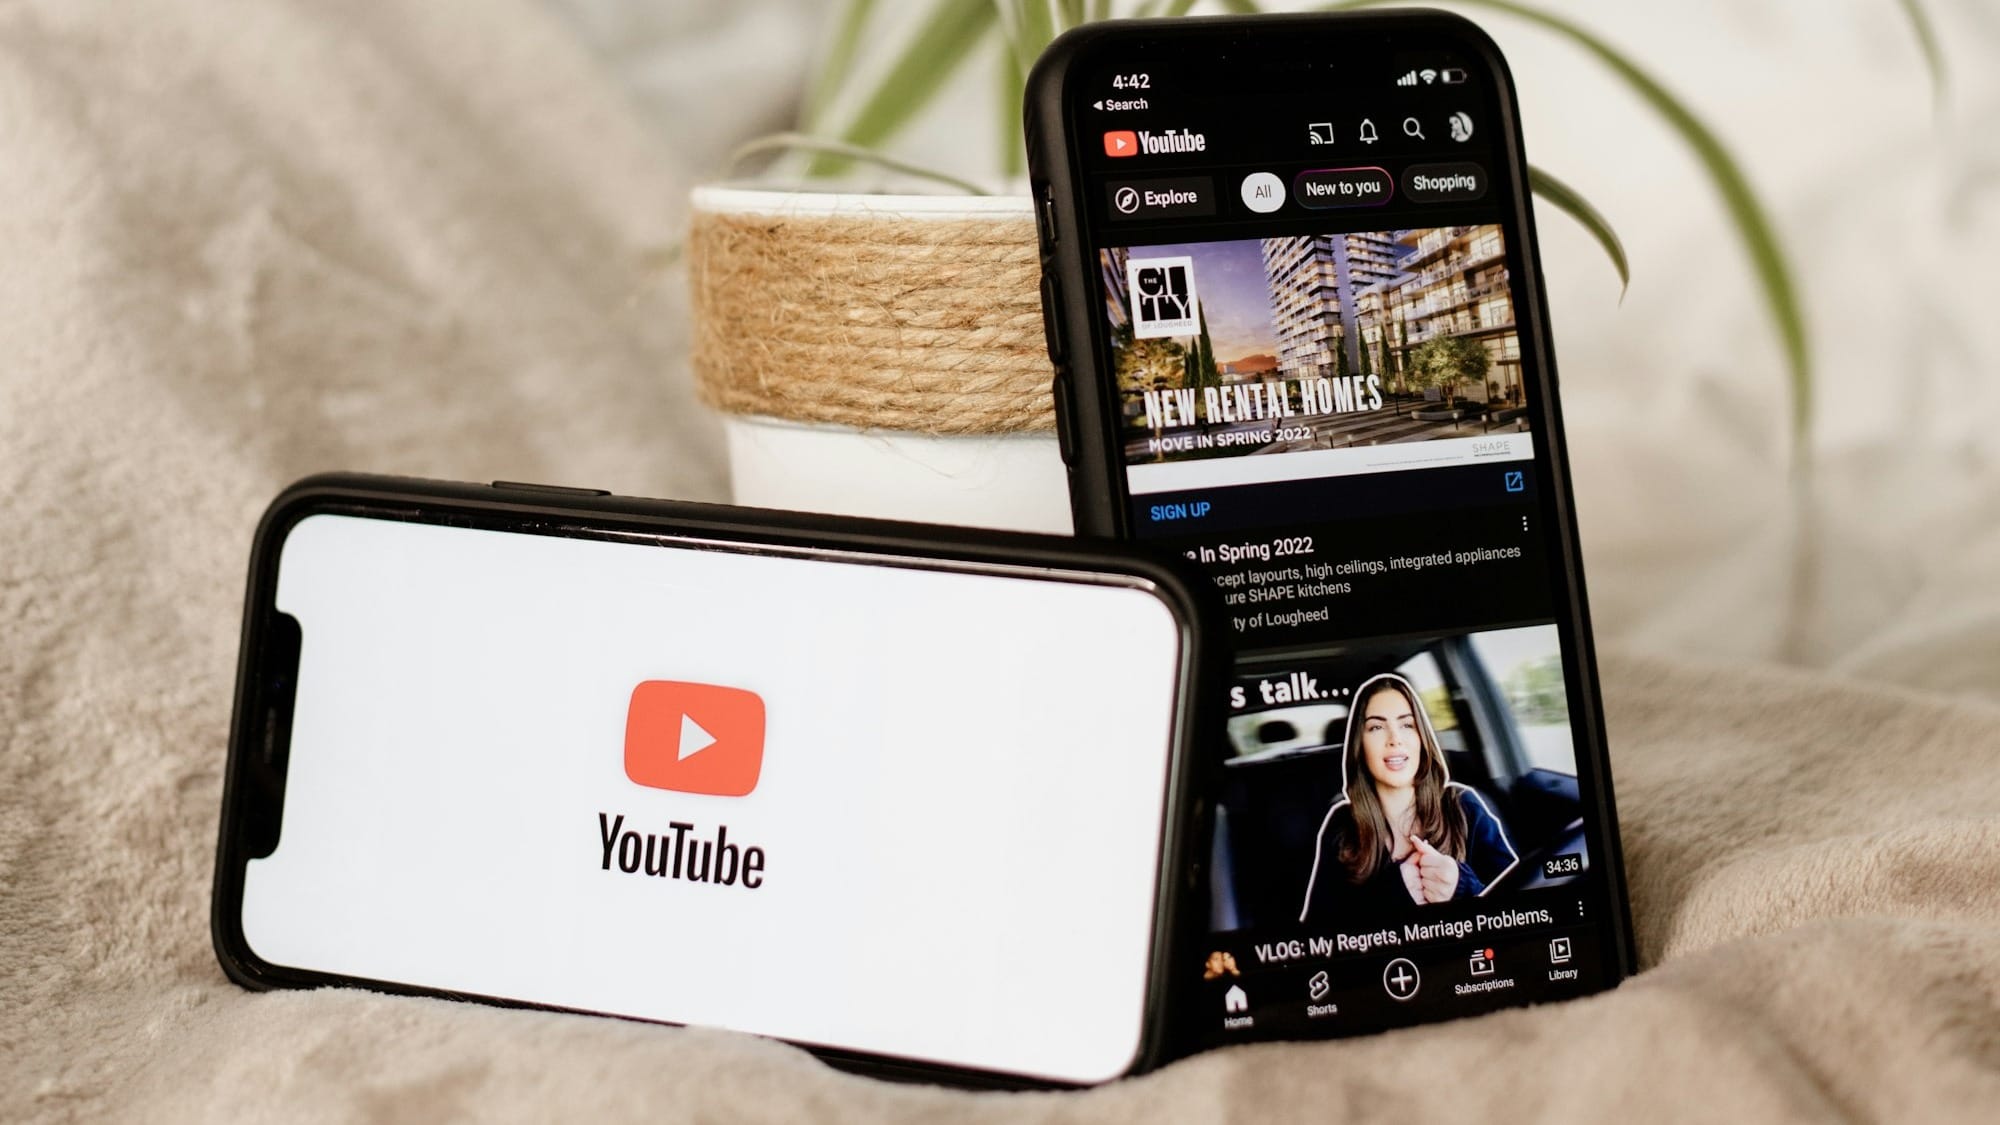 YouTube's new AI feature answers questions about videos